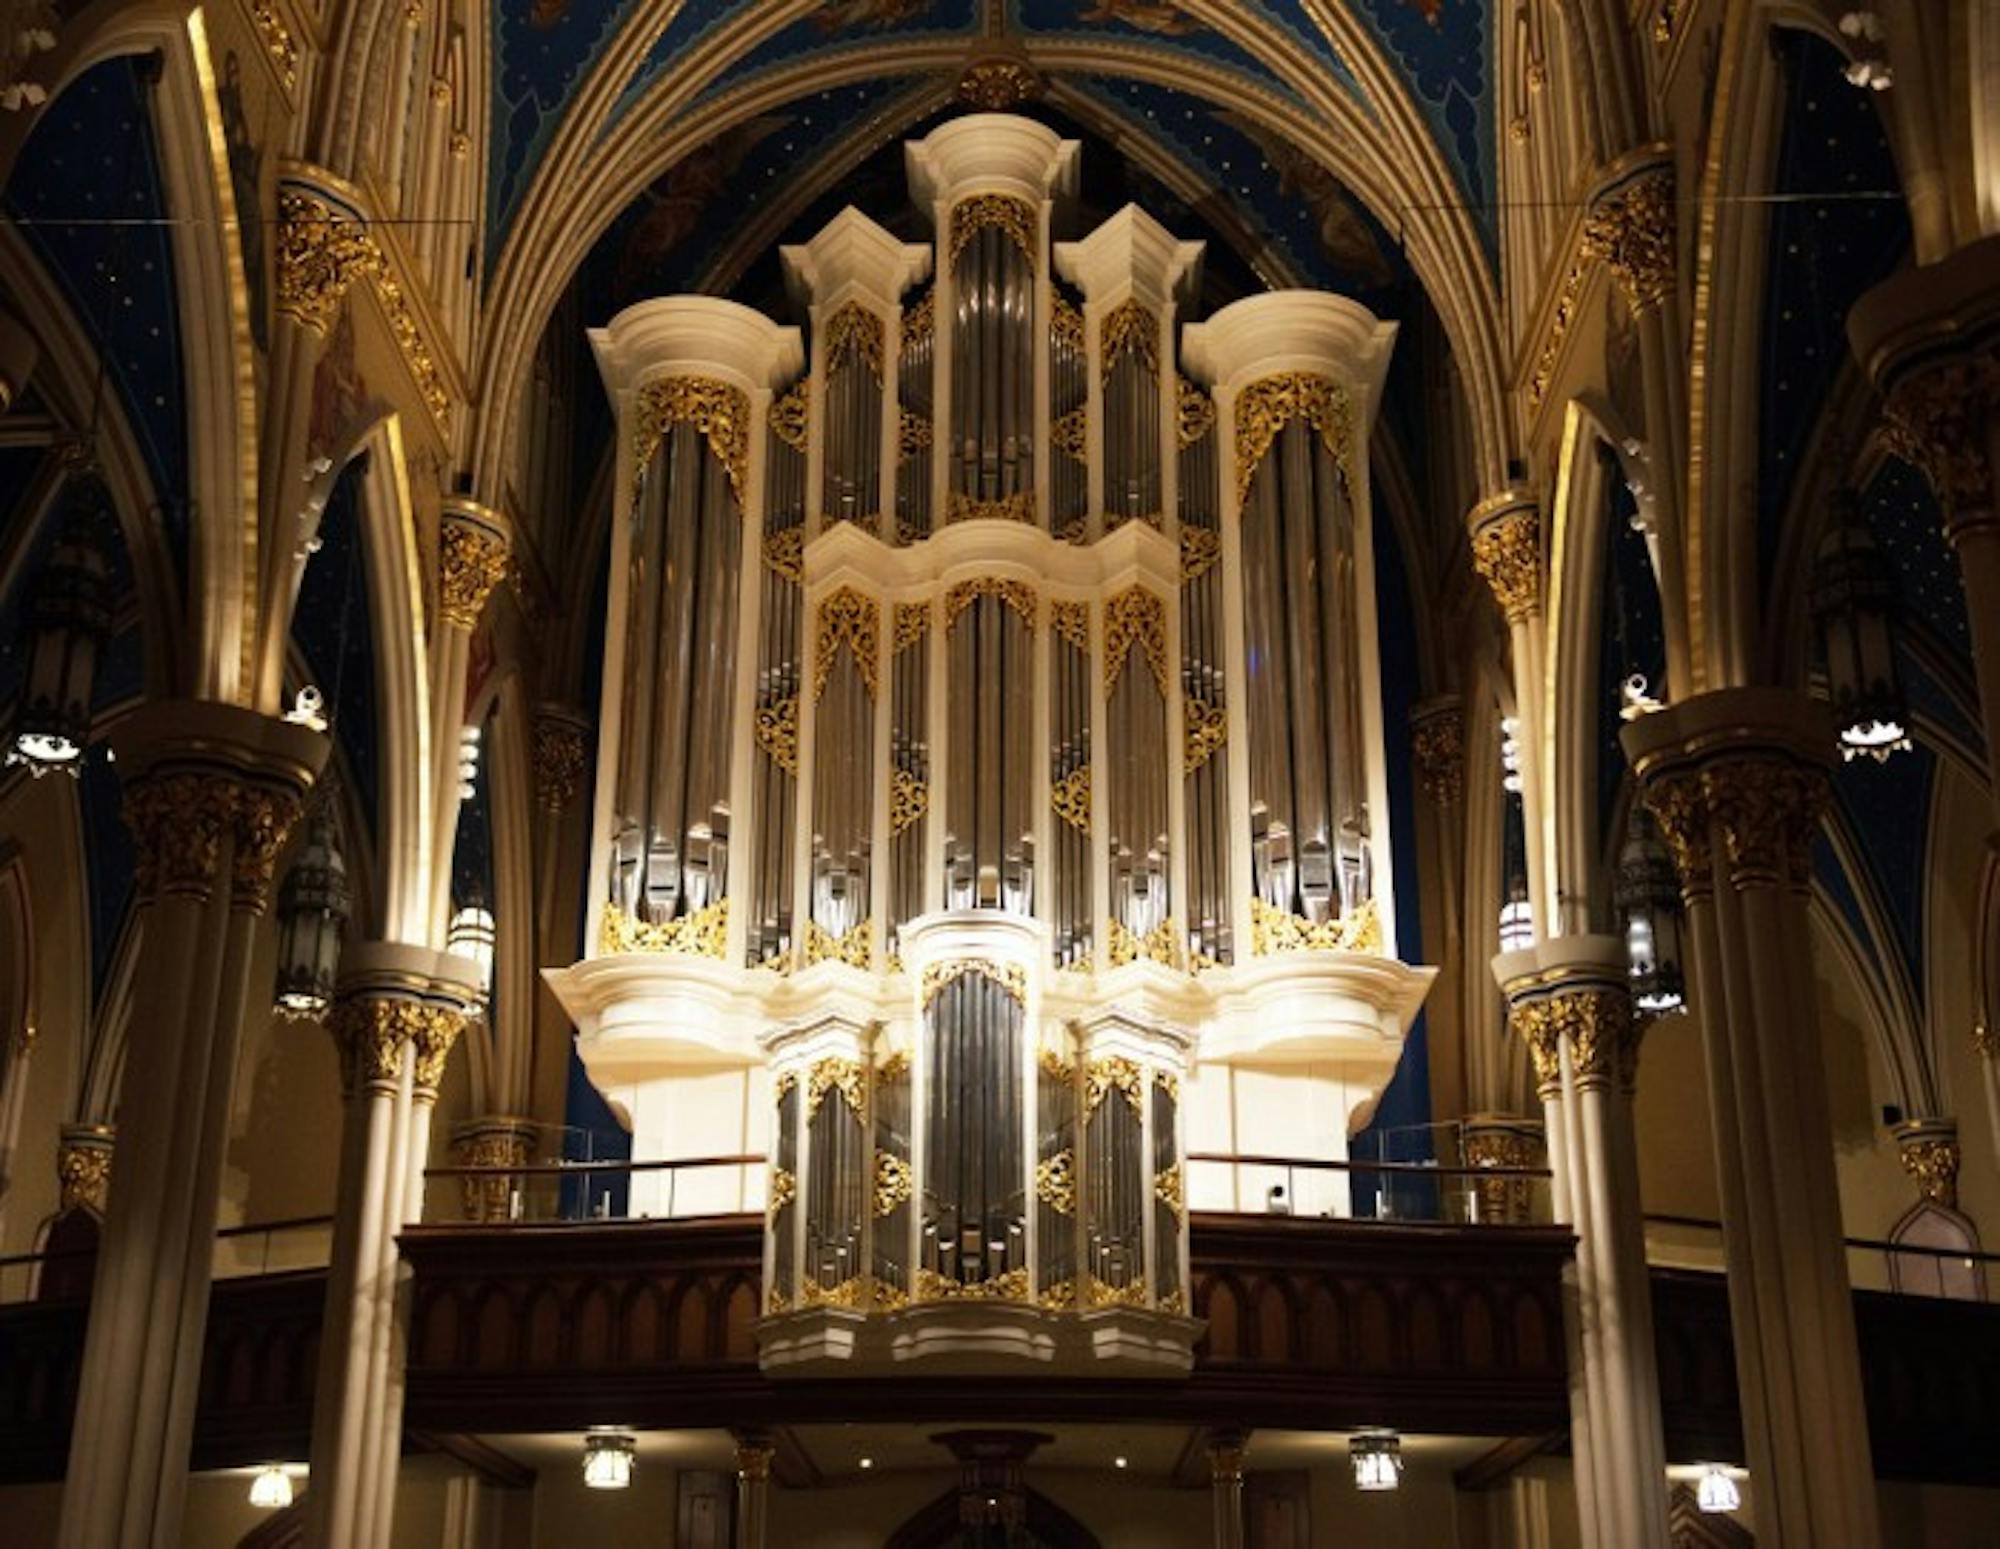 After ten years of organizing and work, the Basilica of the Sacred Heart is dedicating a new organ.